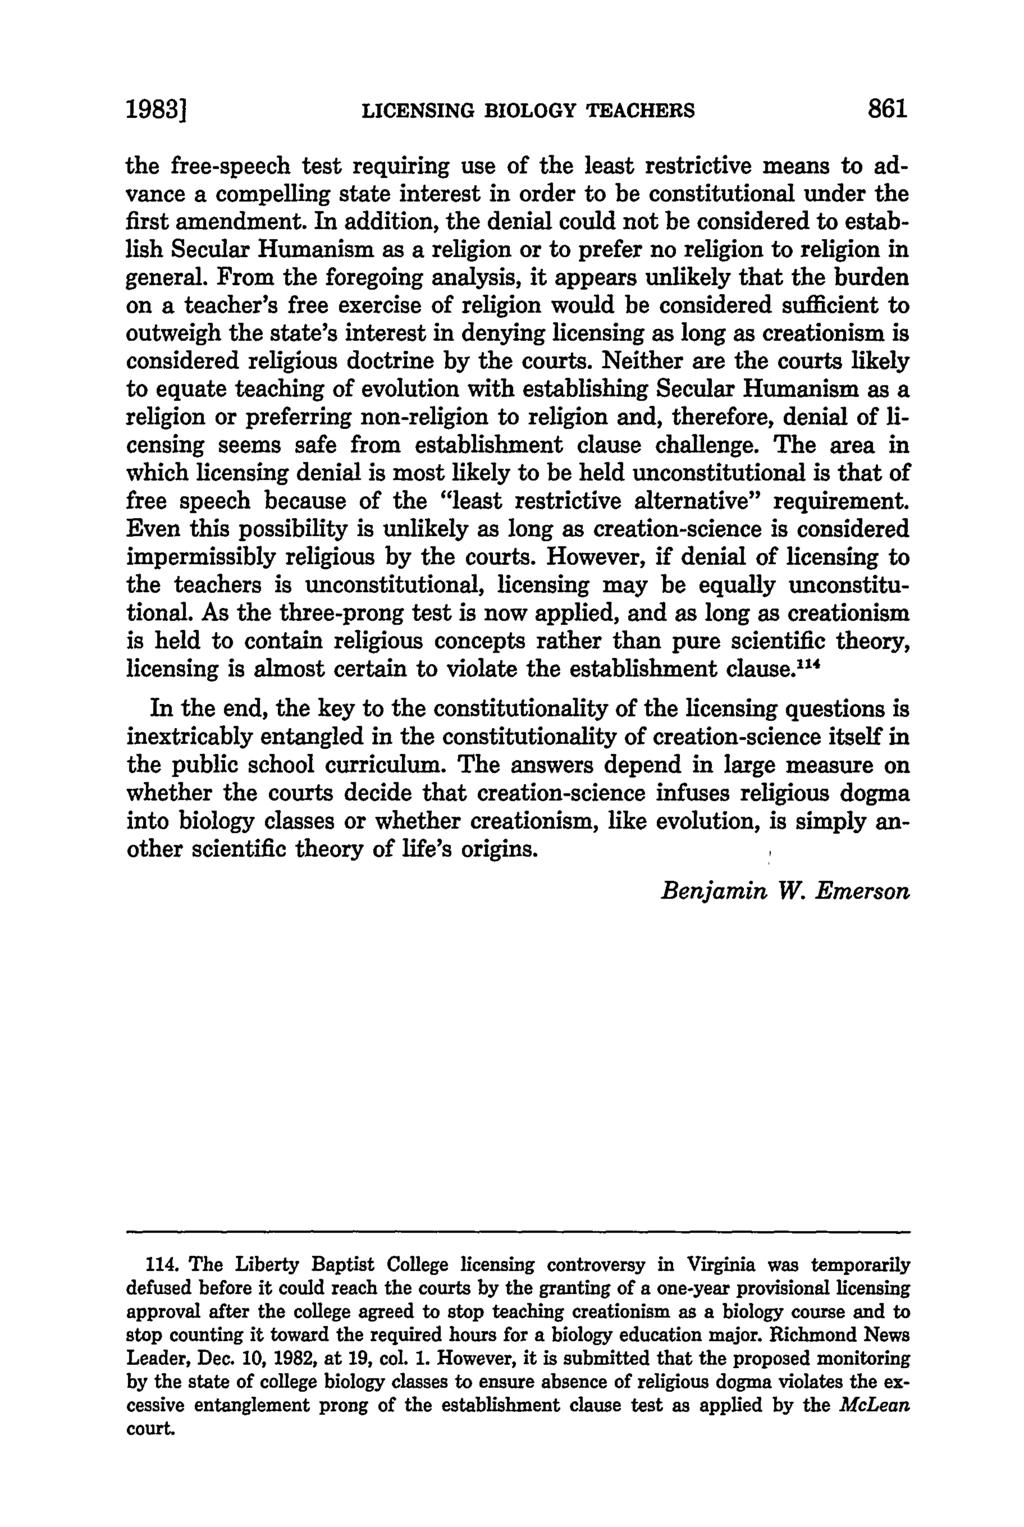 1983] LICENSING BIOLOGY TEACHERS the free-speech test requiring use of the least restrictive means to advance a compelling state interest in order to be constitutional under the first amendment.